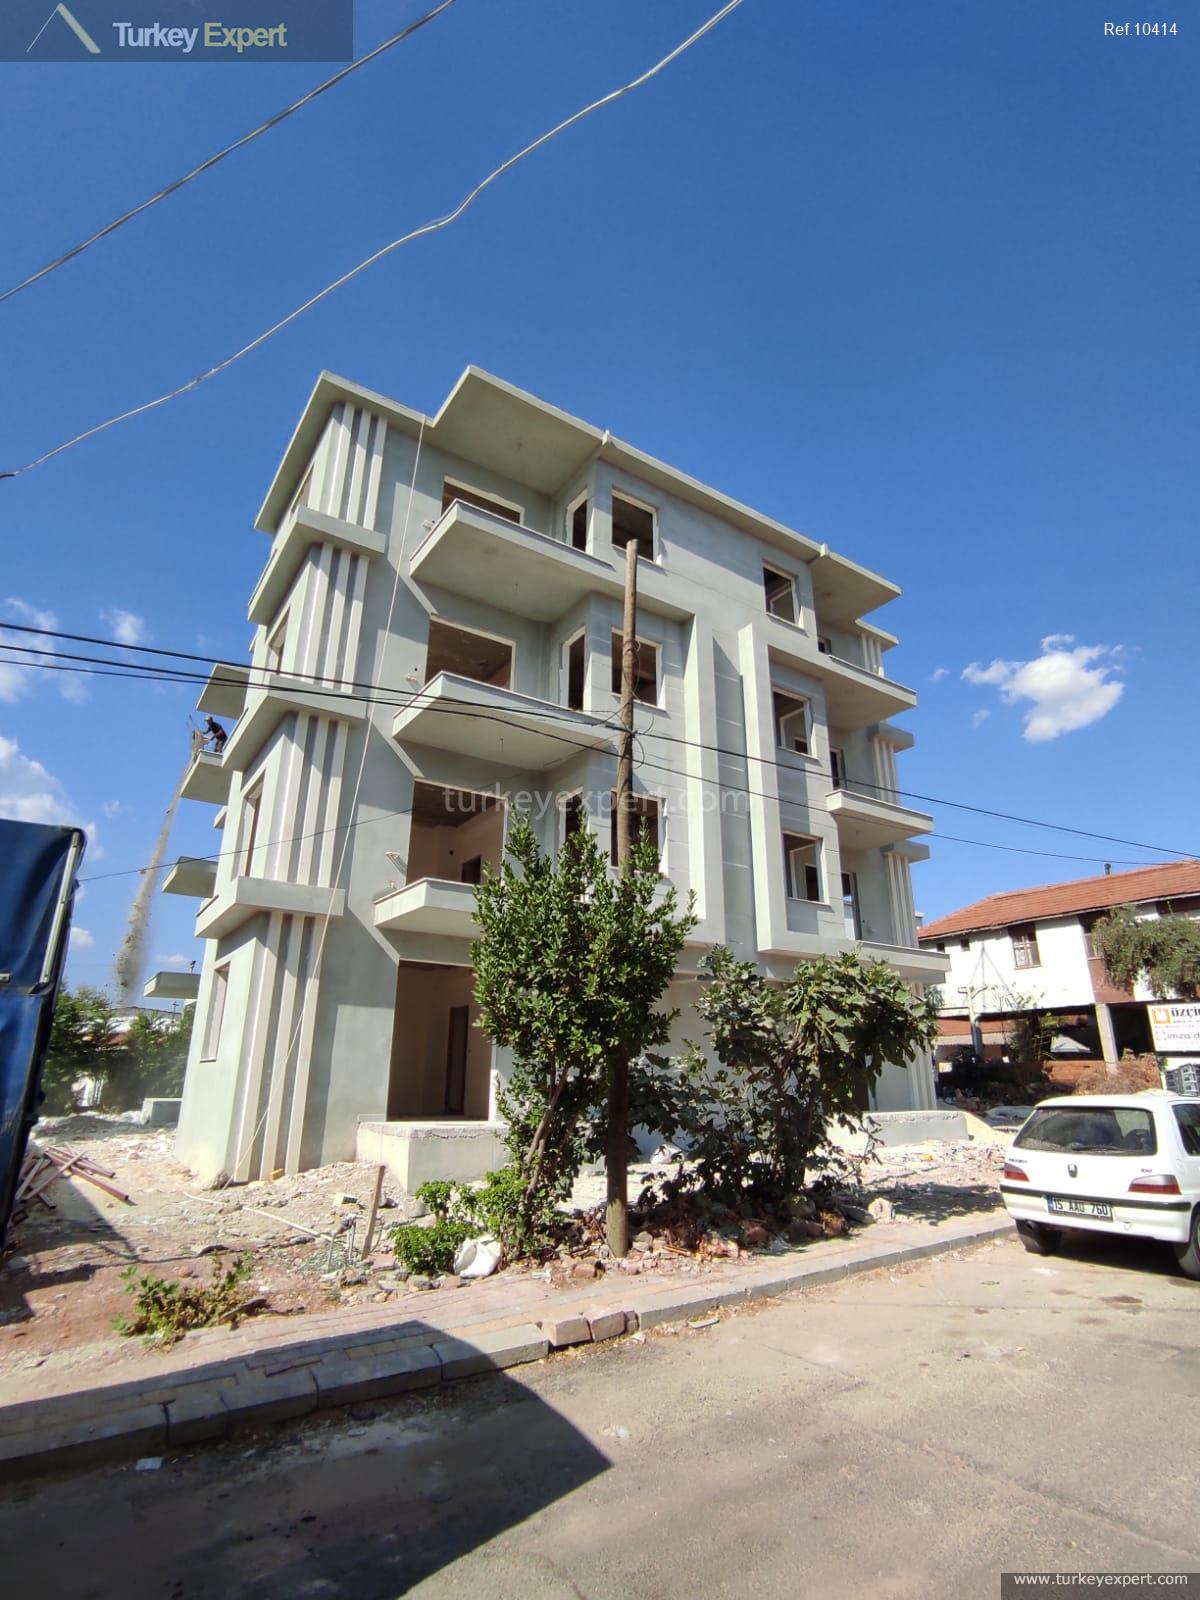 3affordable 2bedroom apartments for sale in antalya6_midpageimg_